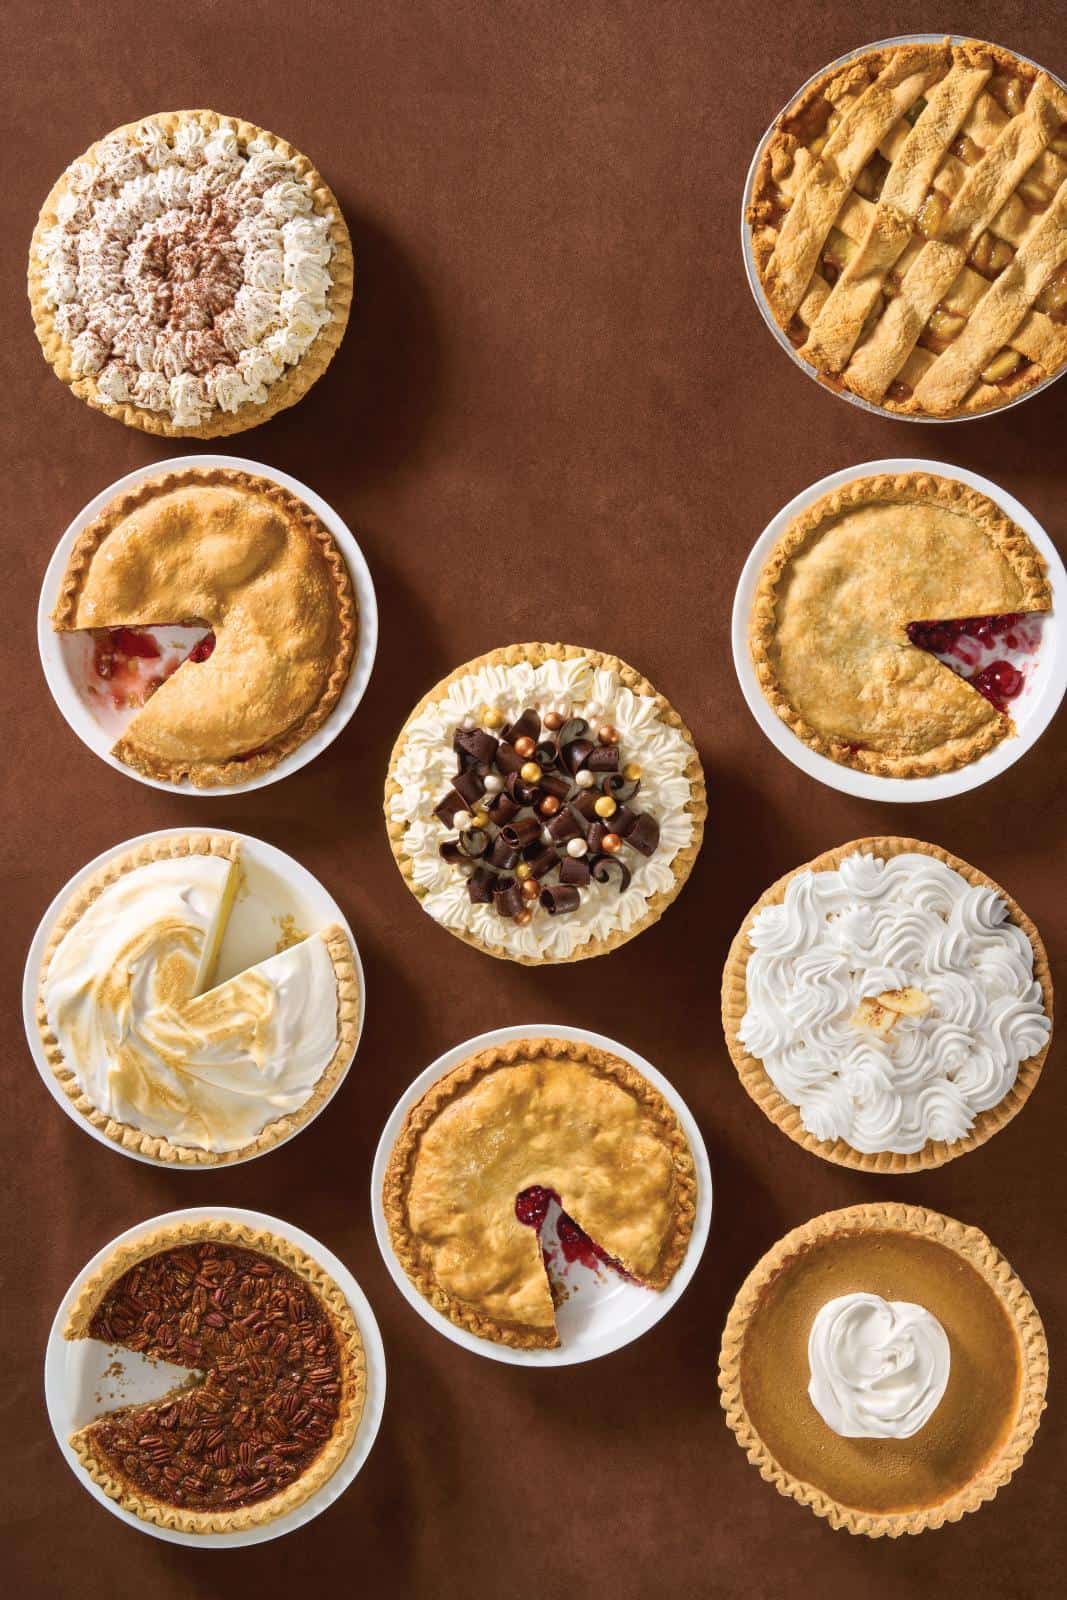 10 varieties of pies on a table some with a slice out of them.